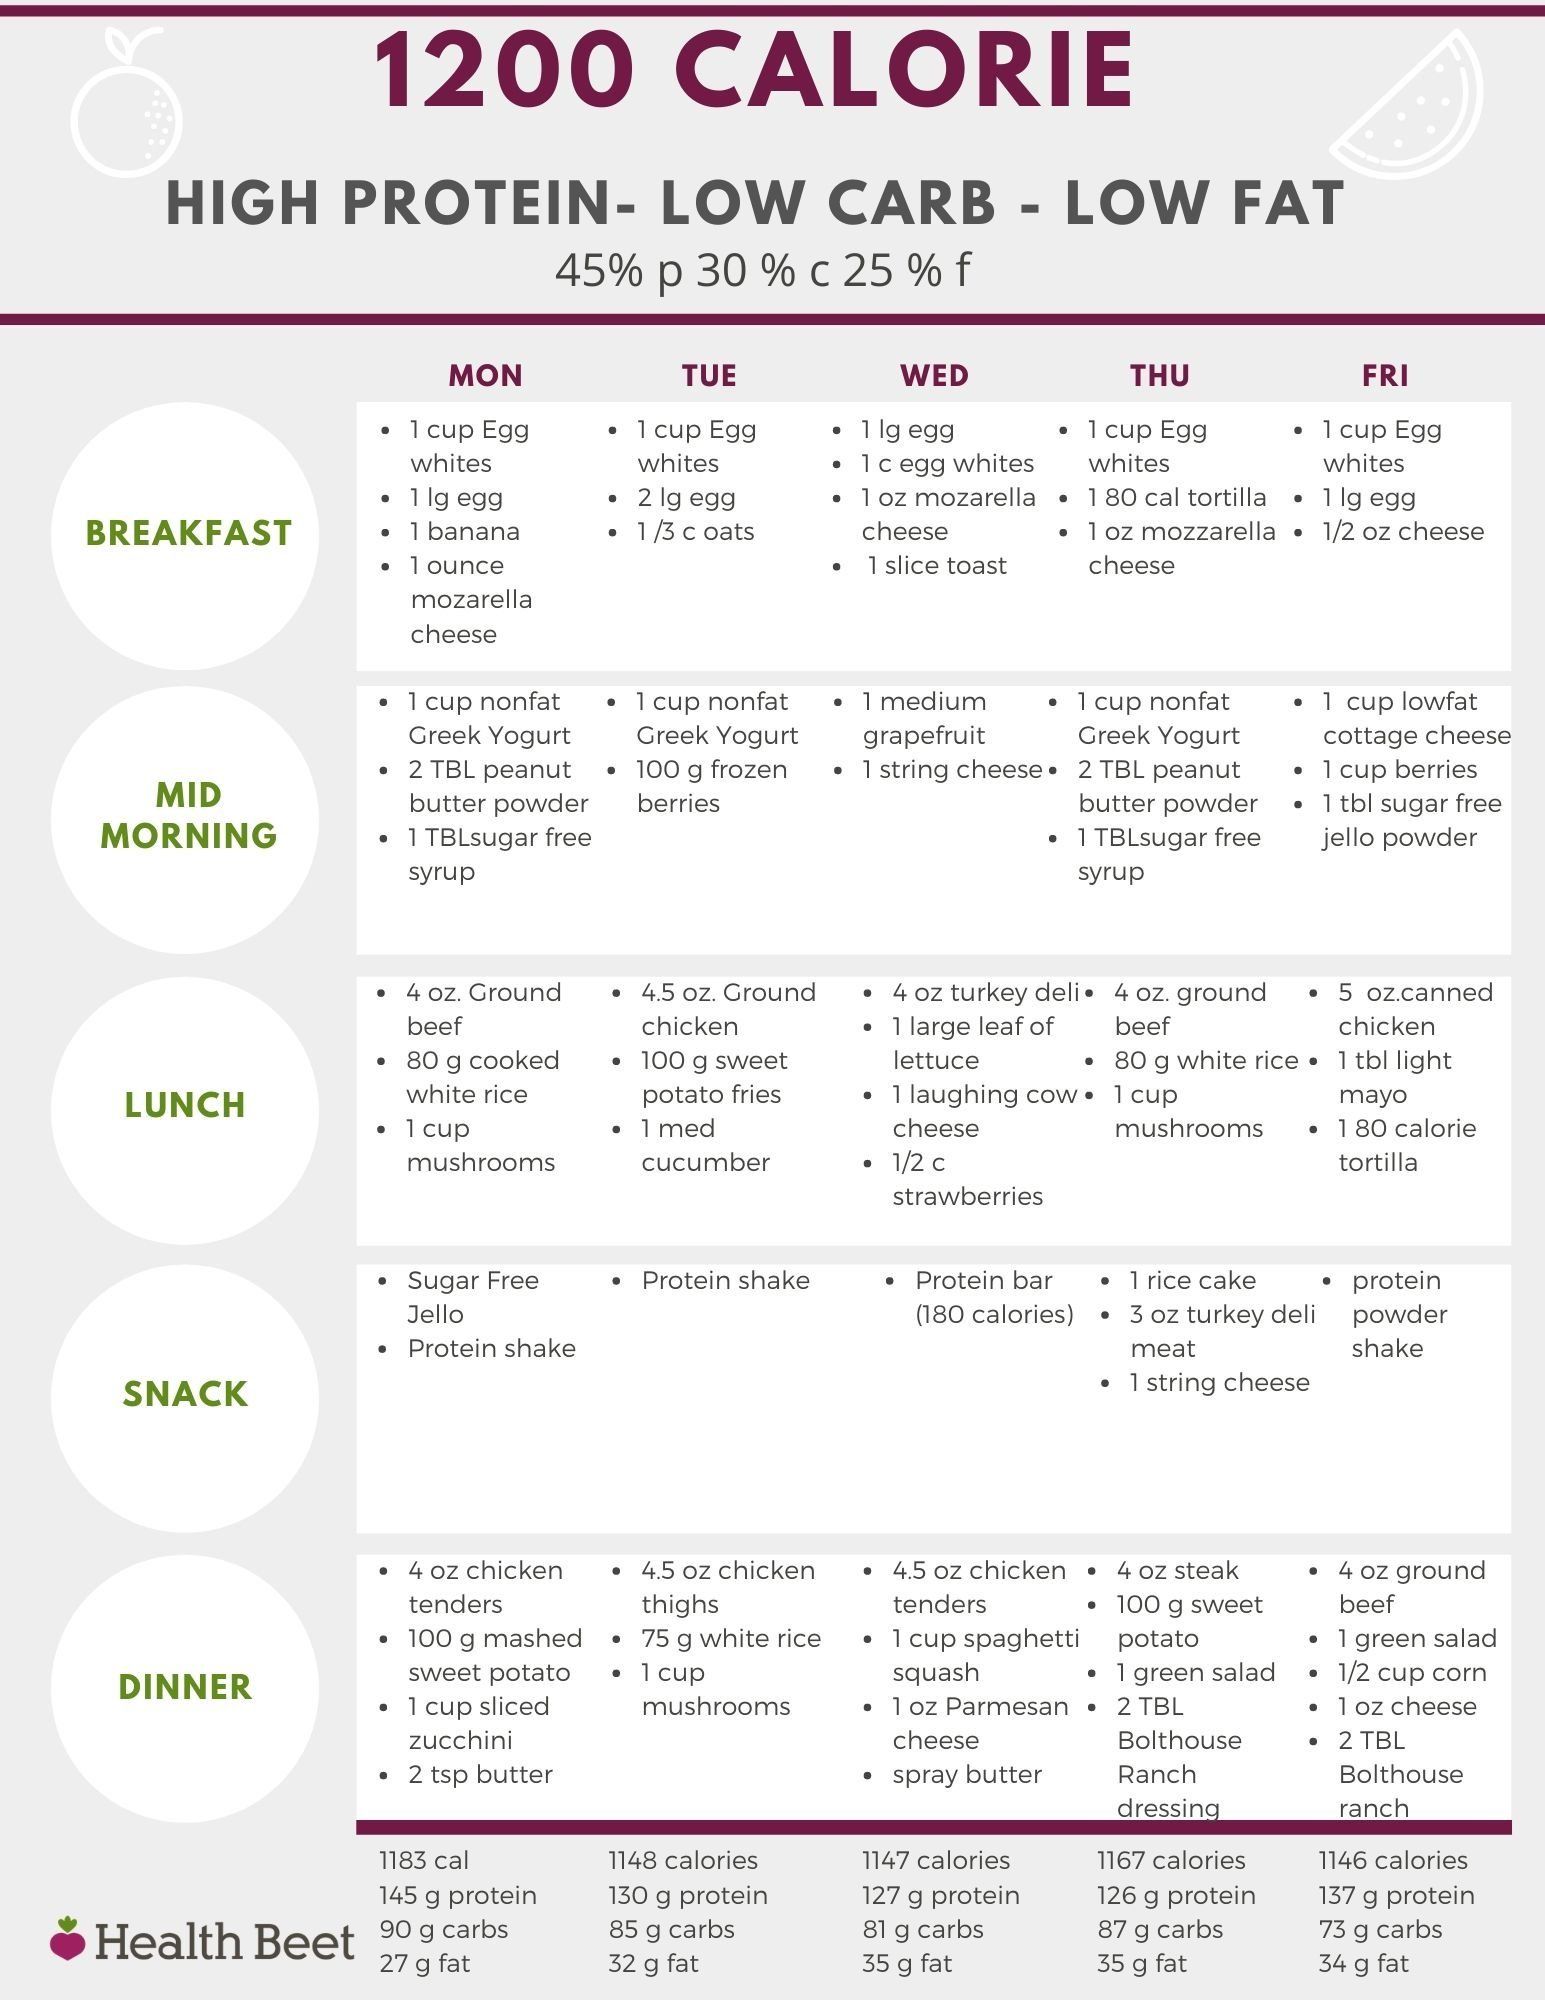 Healthy Food List - A Guide to Nutritious Foods
